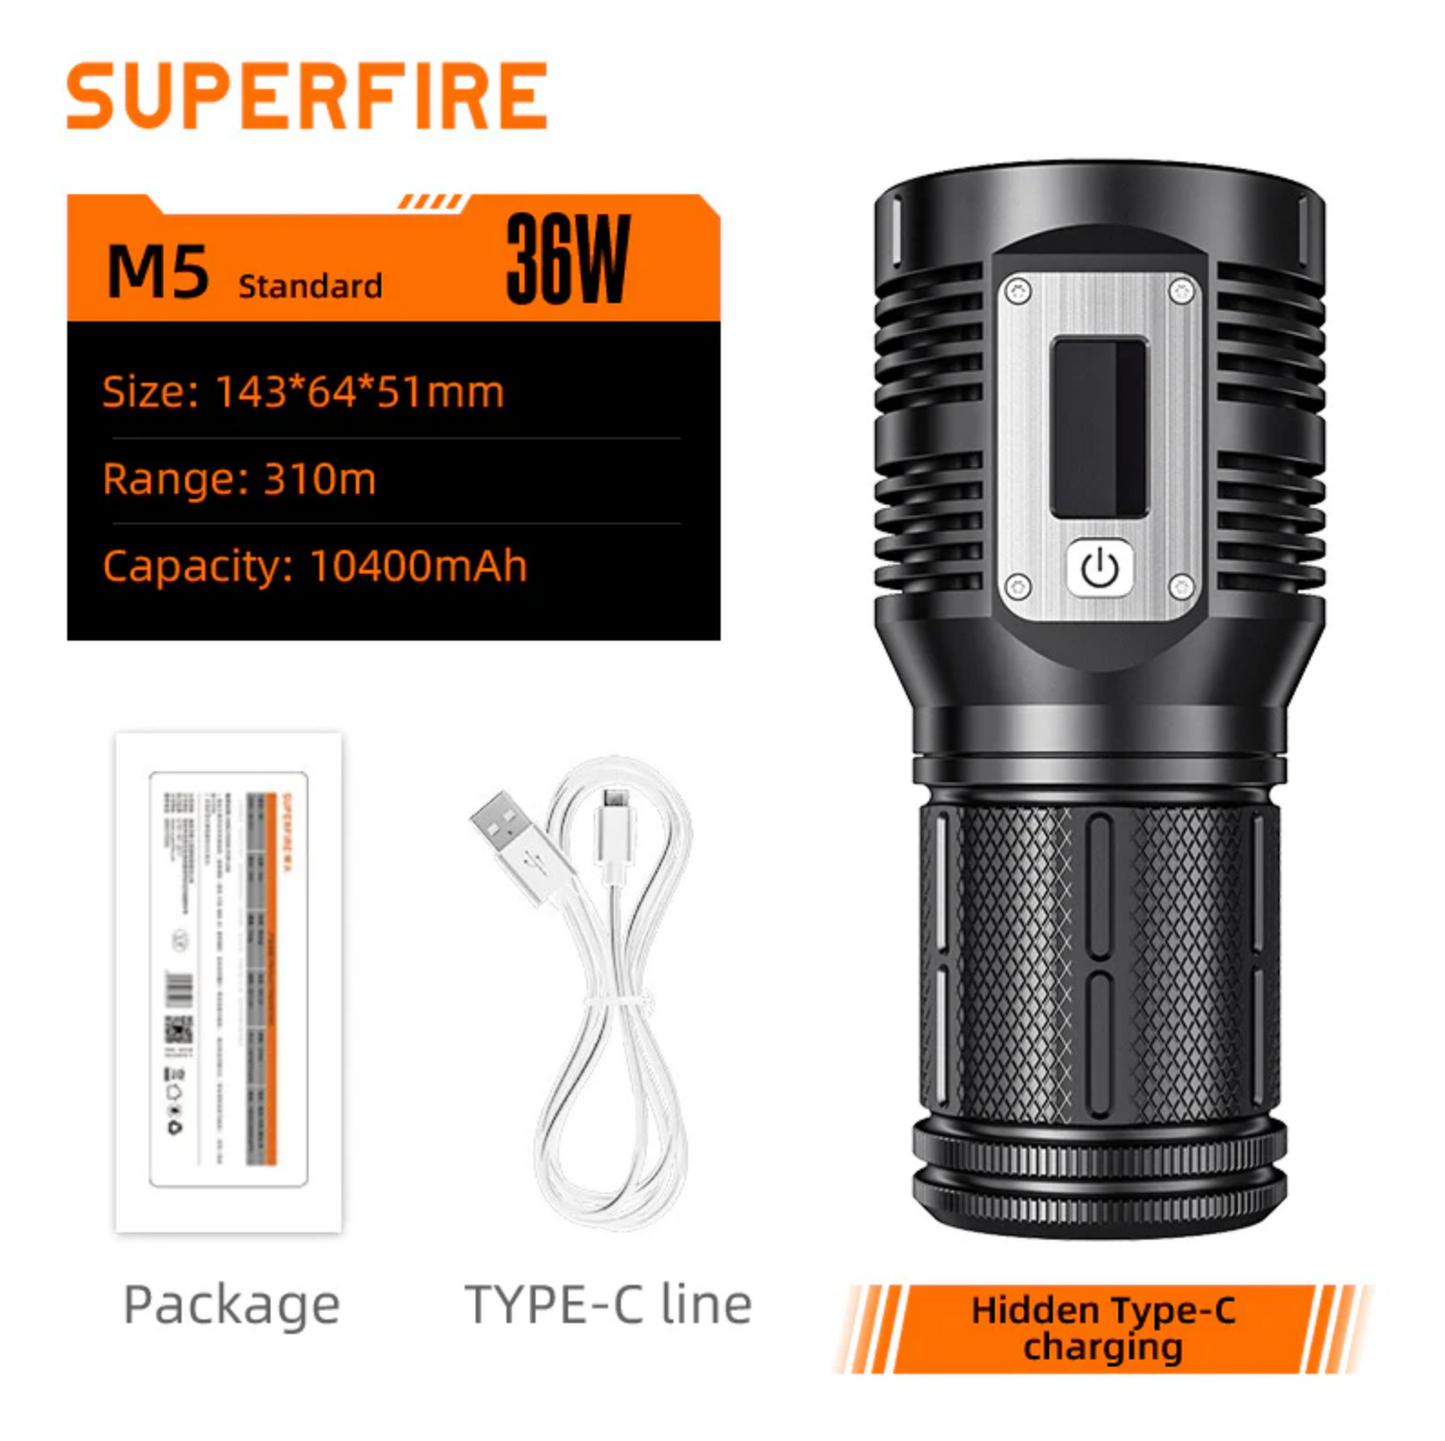 NEW for 2023 - SuperFire M5 36Watt USB-C Rechargeable Flashlight with LED Display and Cell Phone Charging